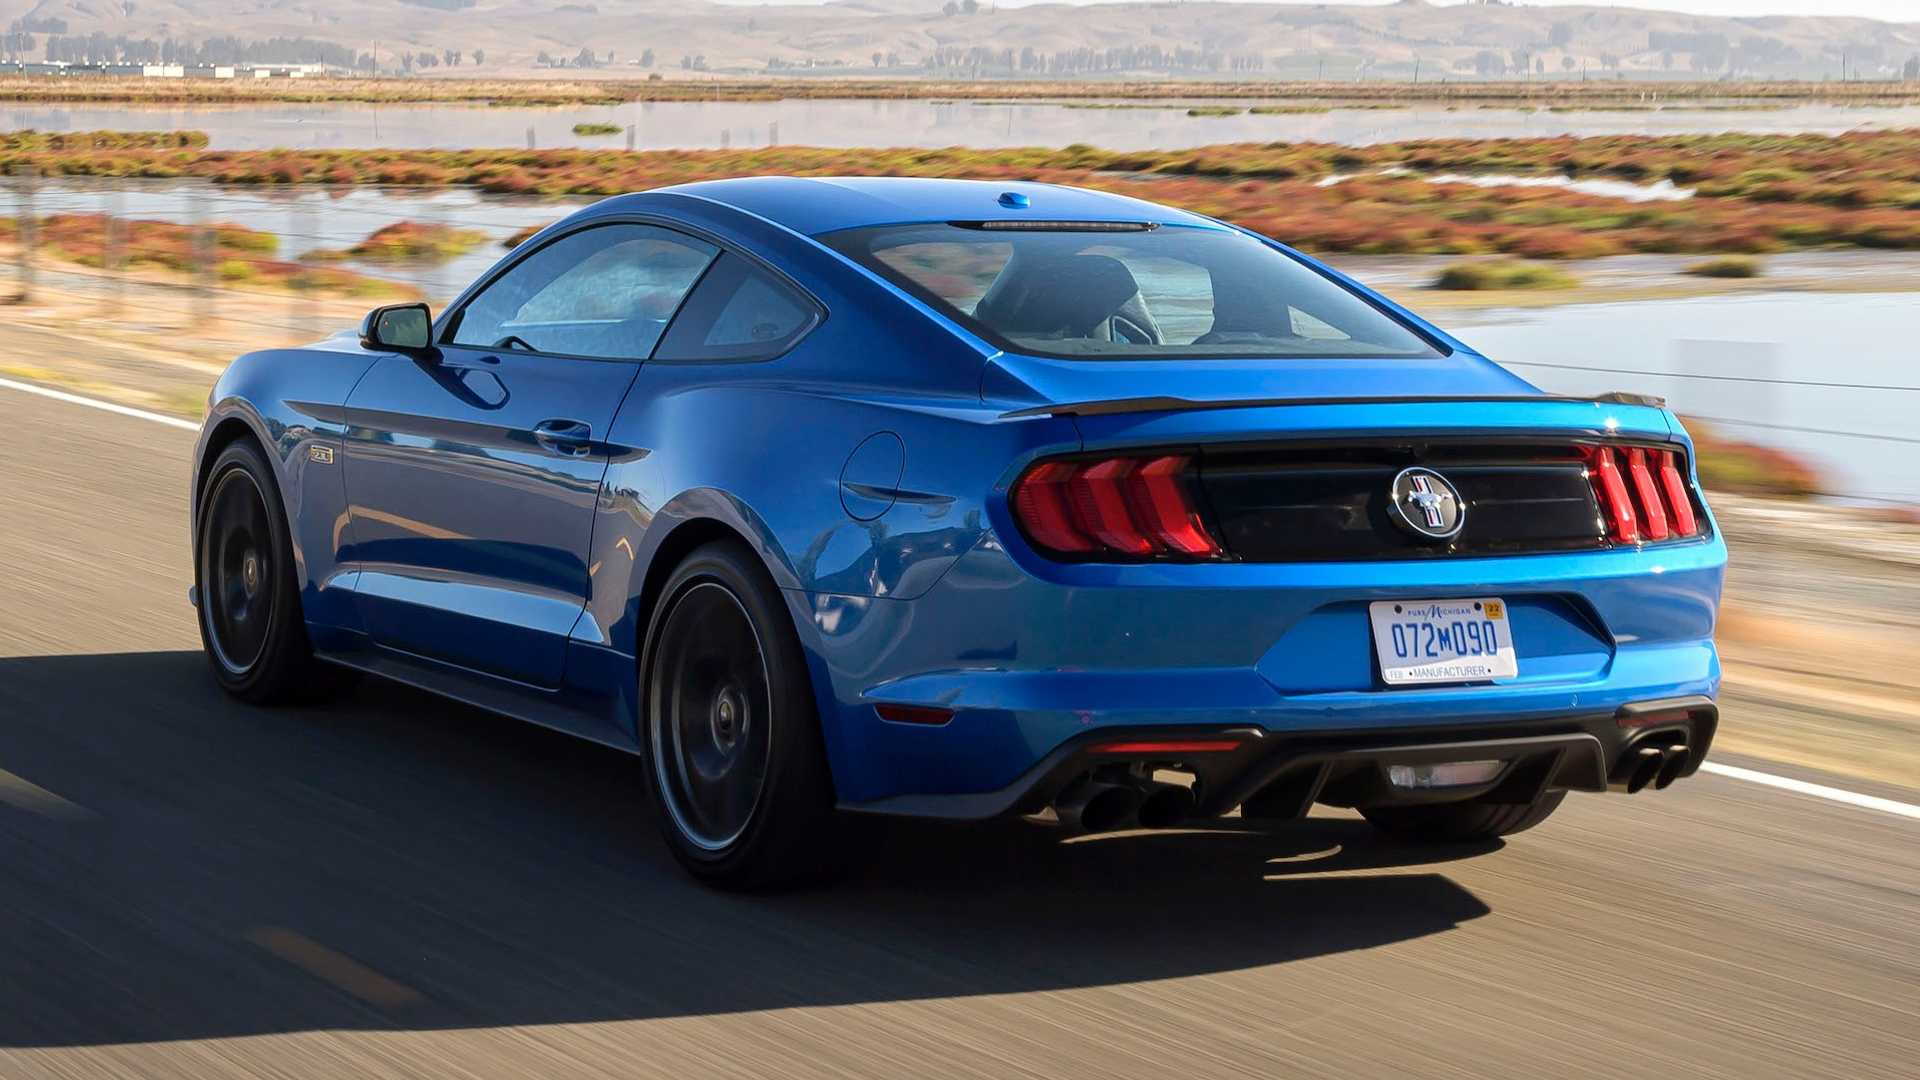 2020 EcoBoost Mustang is a High-Performance Potent Four Banger